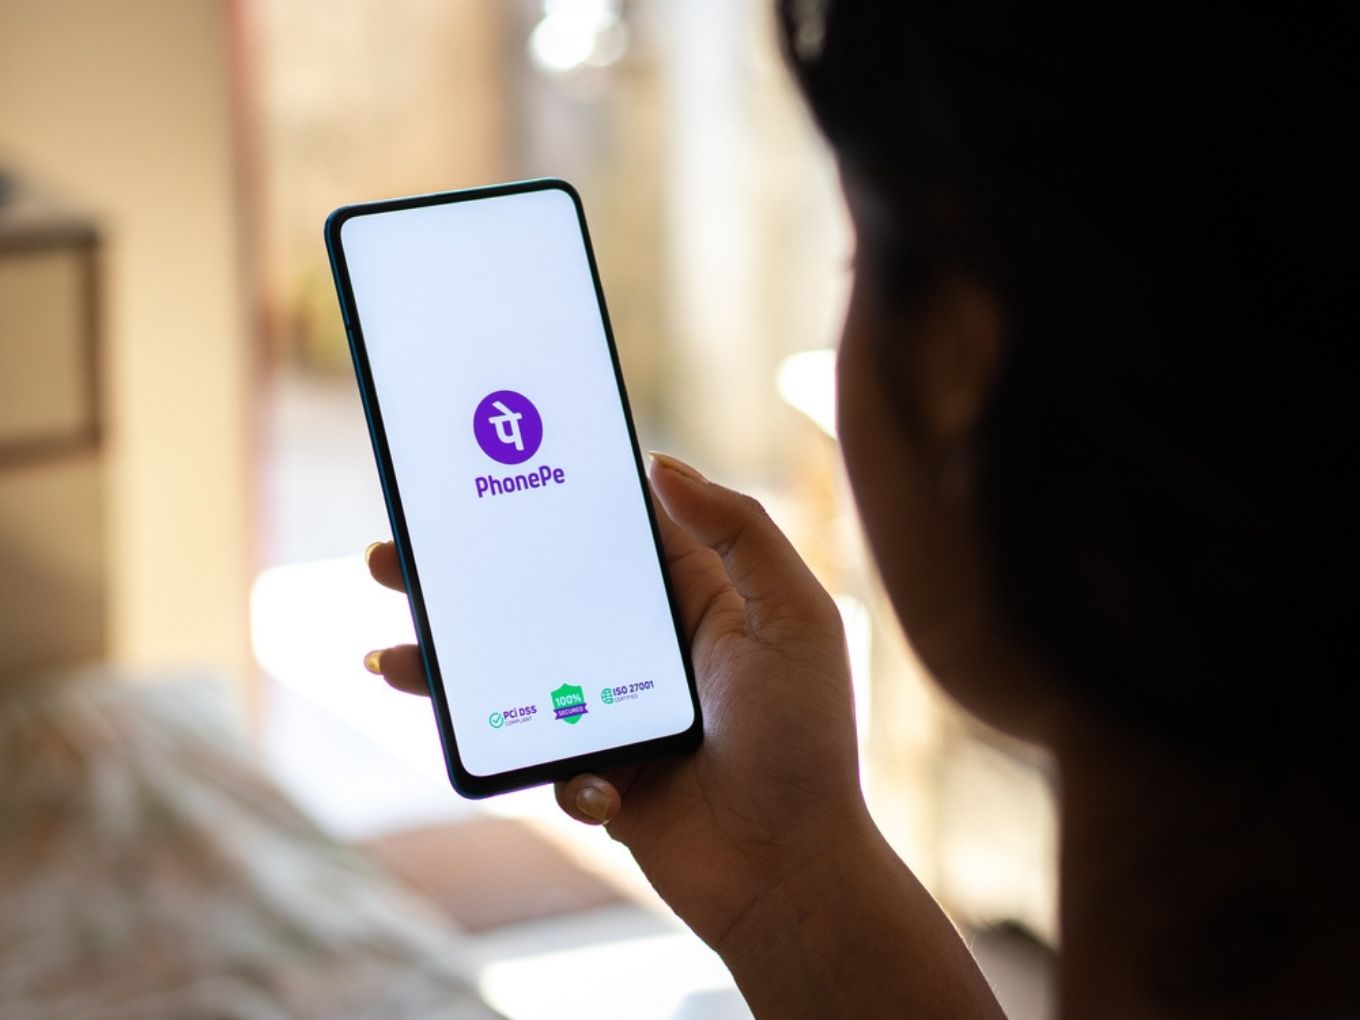 PhonePe Leads UPI Market With 42% Share, Google Pay Trails by 6%